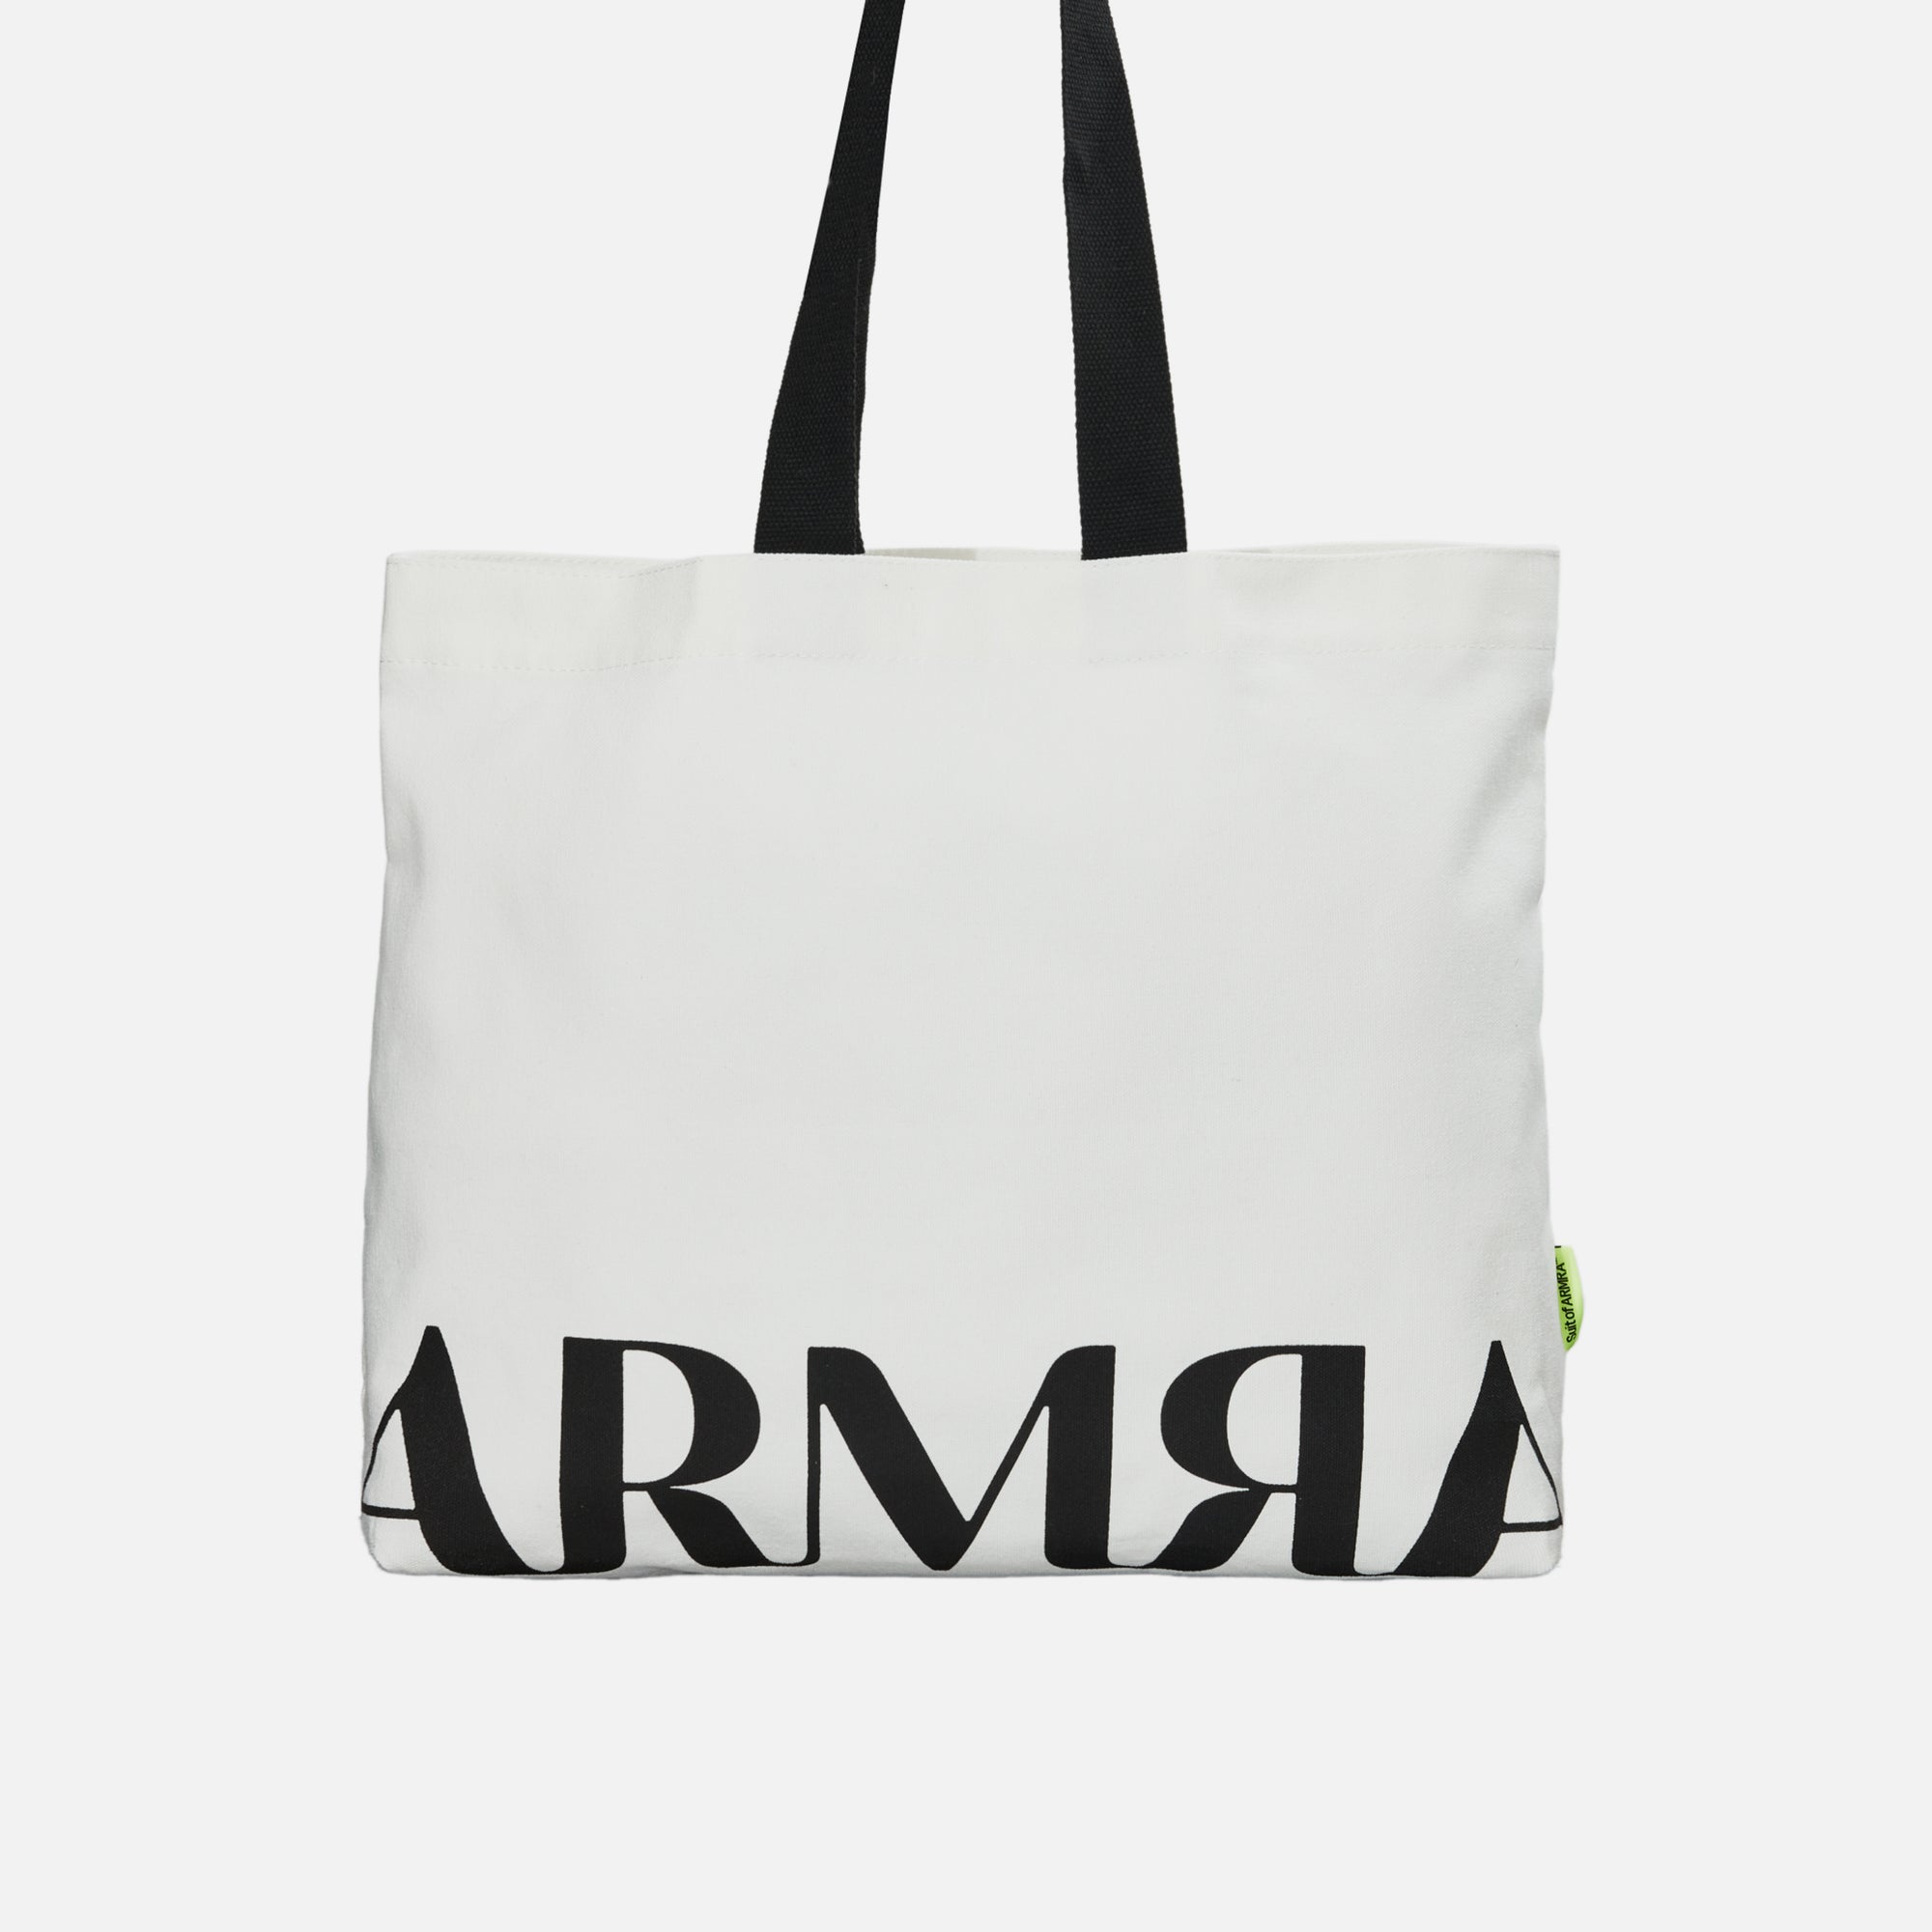 Front of white tote bag with black handles hanging with black text “ARMRA”